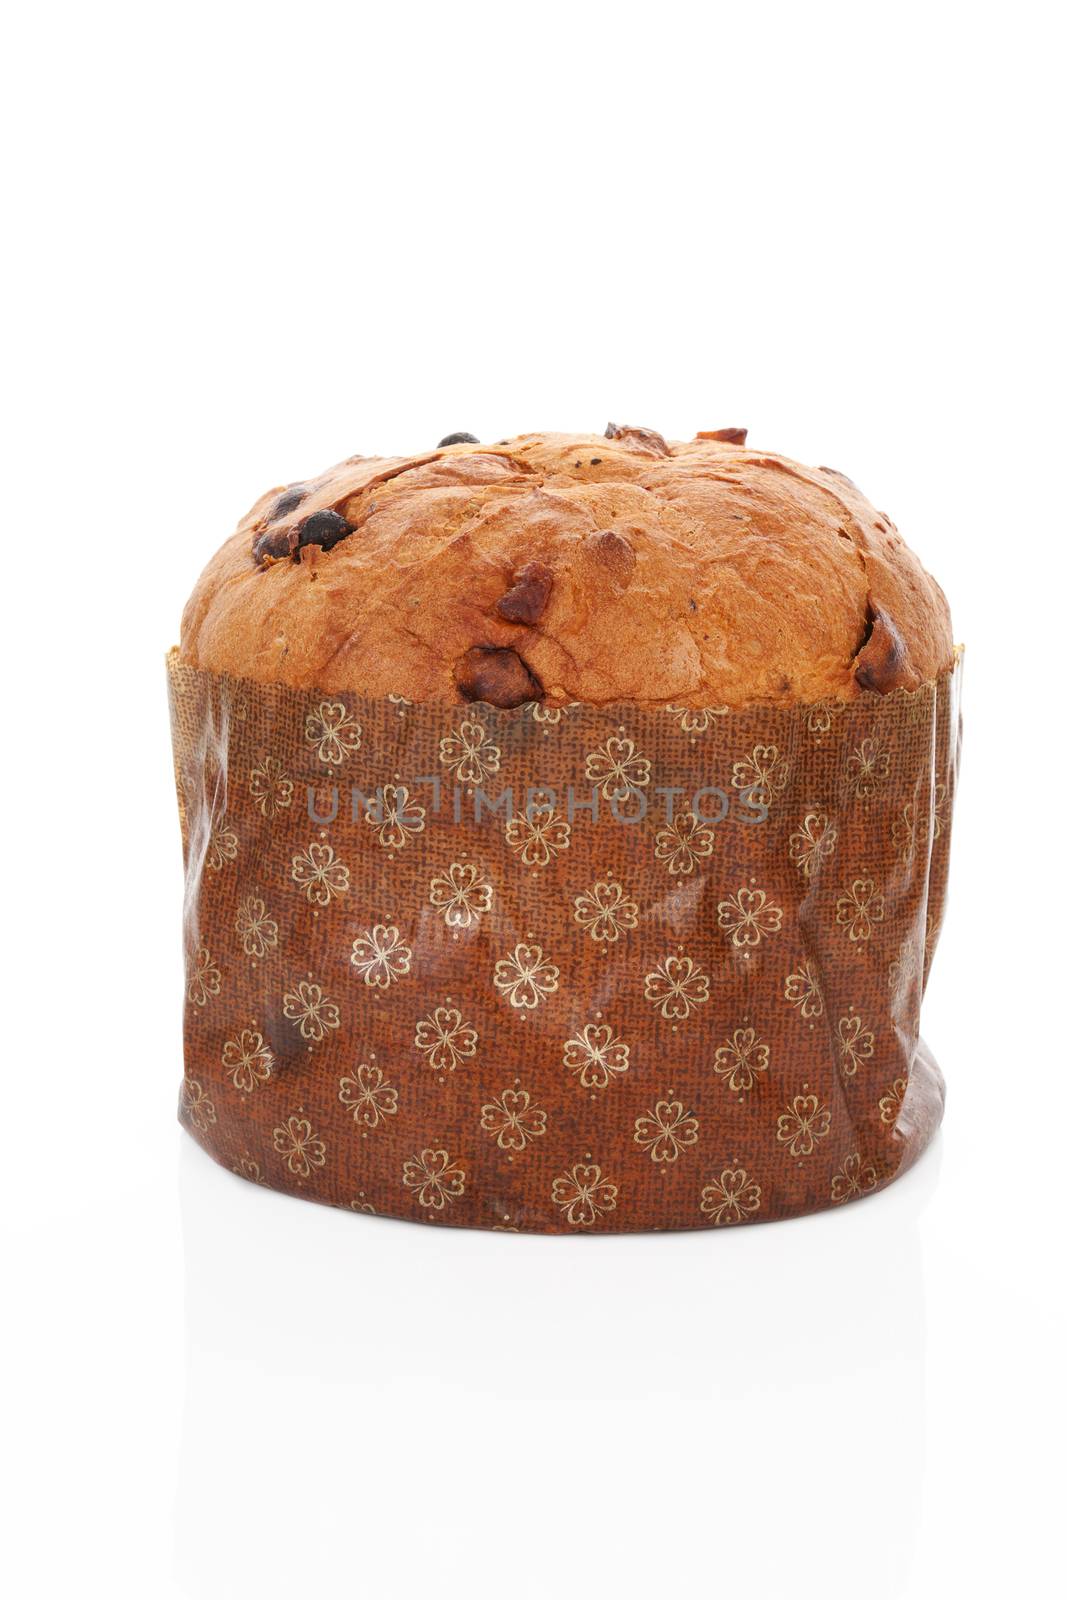 Panettone cake isolated. by eskymaks